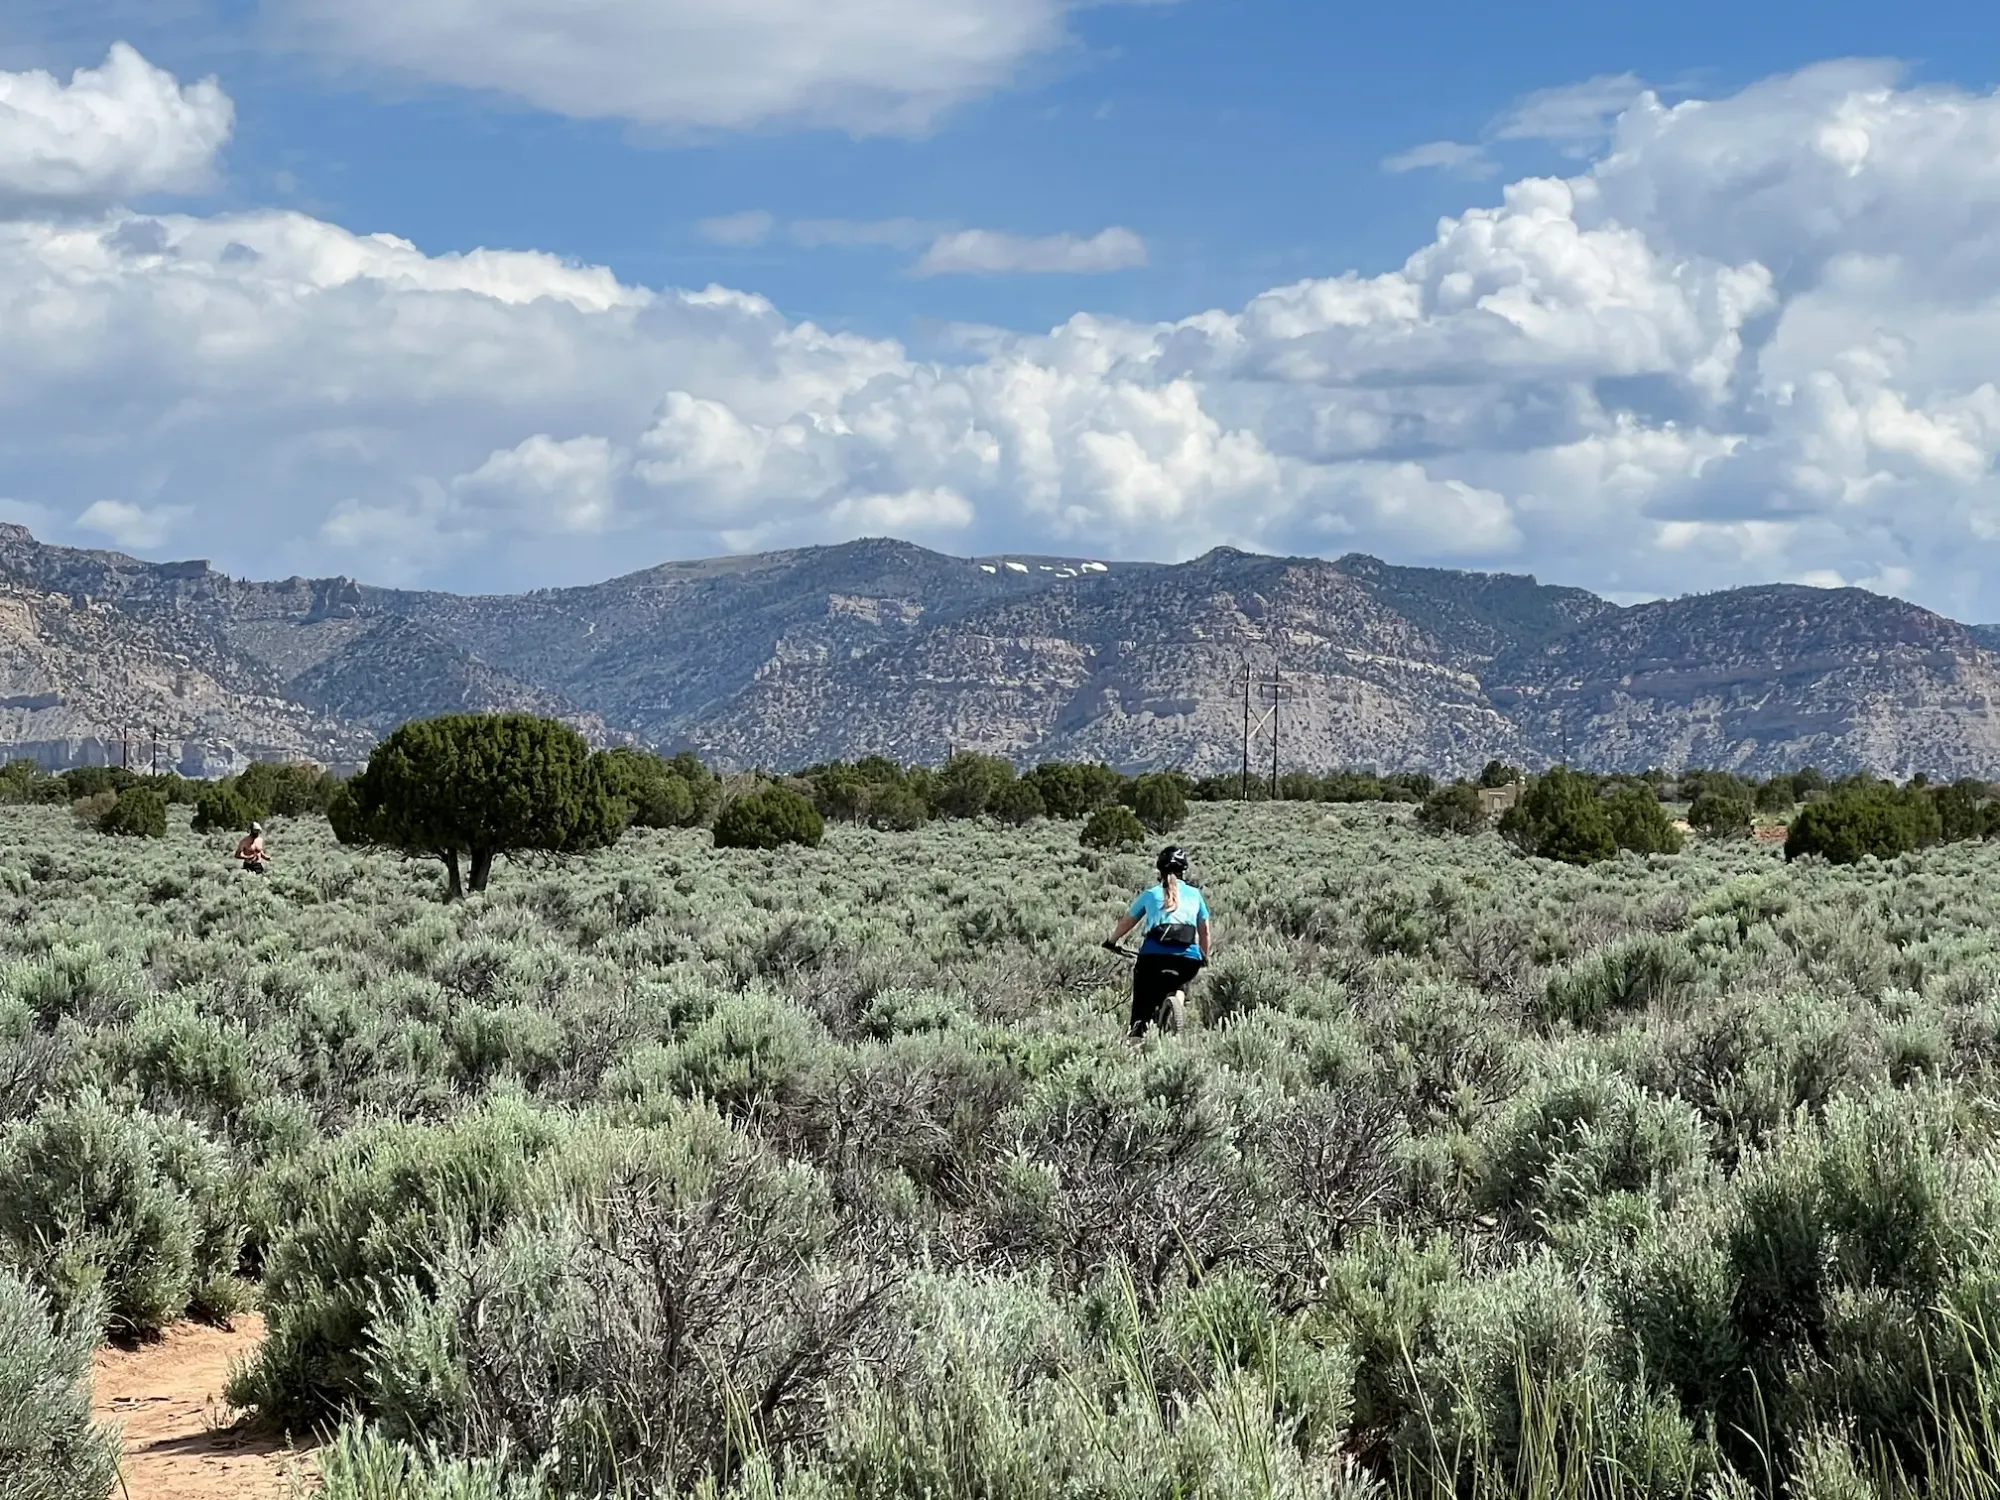 Lindsey is riding her mountain bike on the Solis Connector Trail at the Wood Hill Trail System in Price, UT